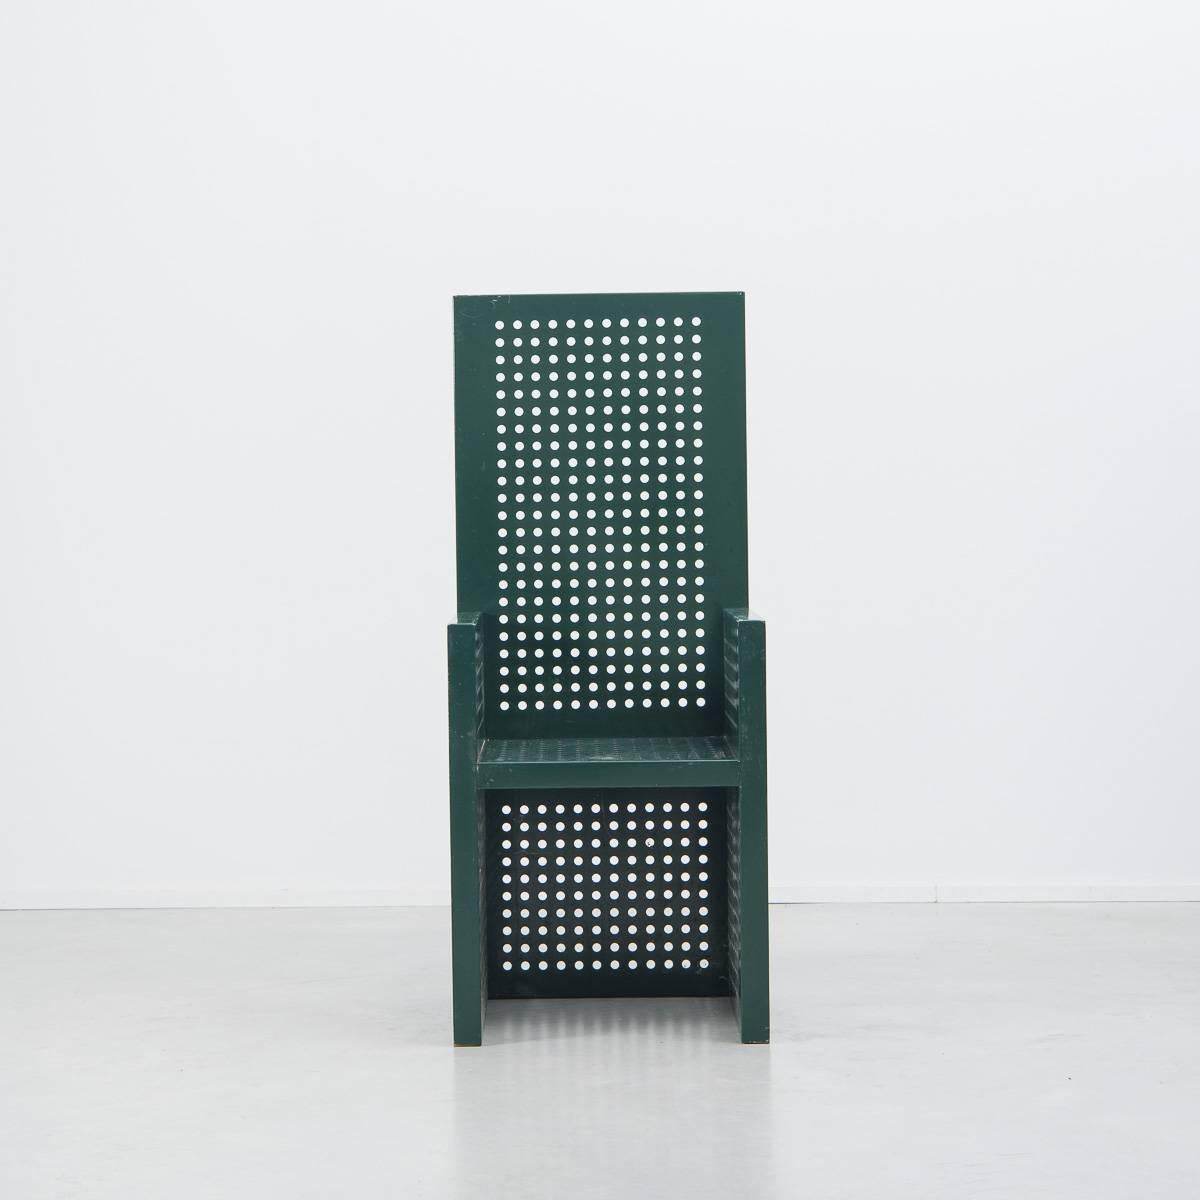 This powerful set of six perforated chairs could work for an interior or exterior setting. Their strong form and perforated surfaces create striking shadows. They remind us of a more brutal Charles Rennie Mackintosh’s Hill House high back chair and